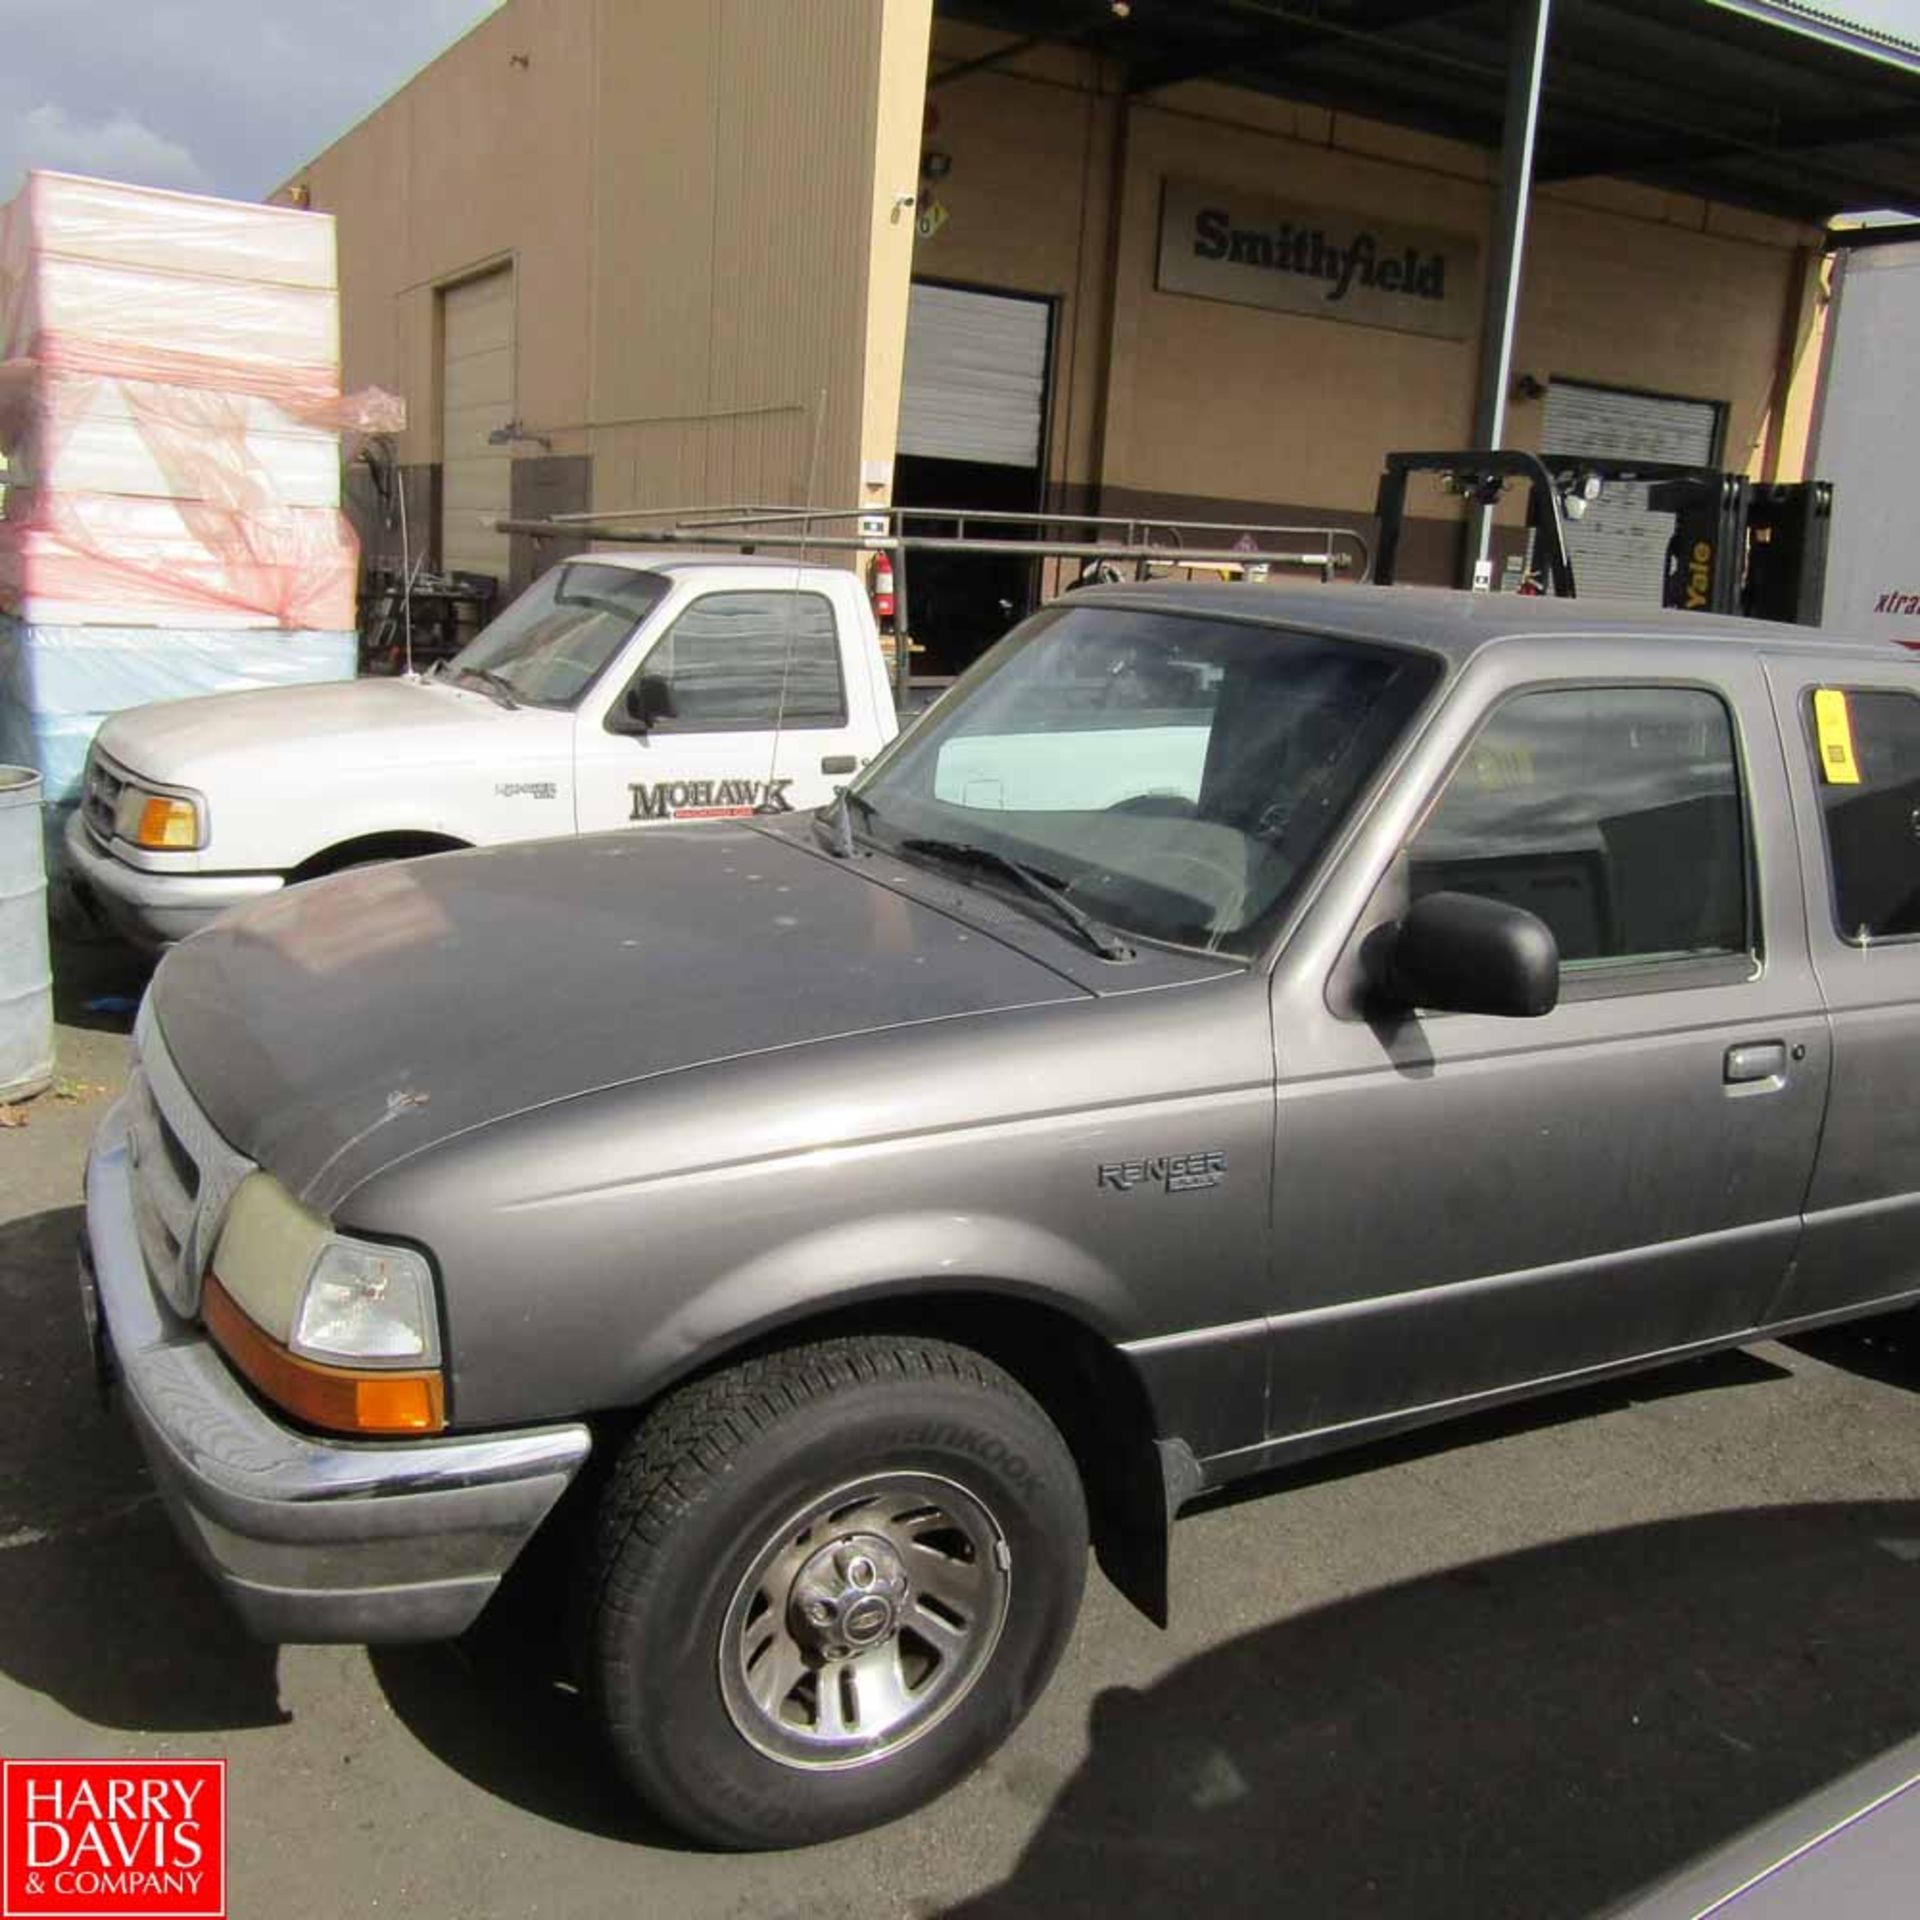 Ford Ranger XLT Pickup Truck, VIN # 1FTYRI4U6WPB32868, with 3.0 L Gas Engine and Automatic